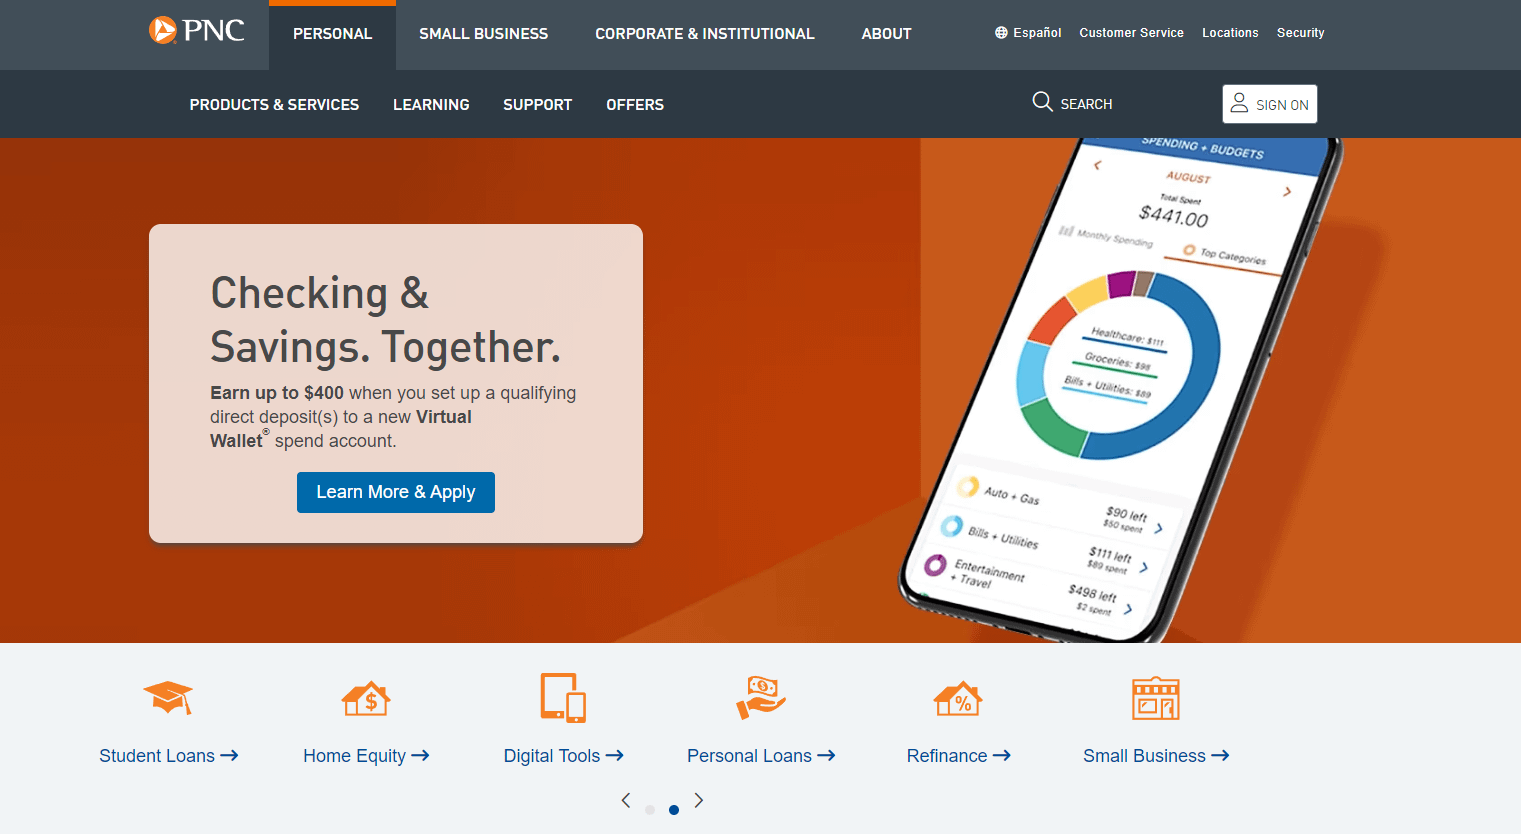 Banks that don't use chexsystems: PNC homepage